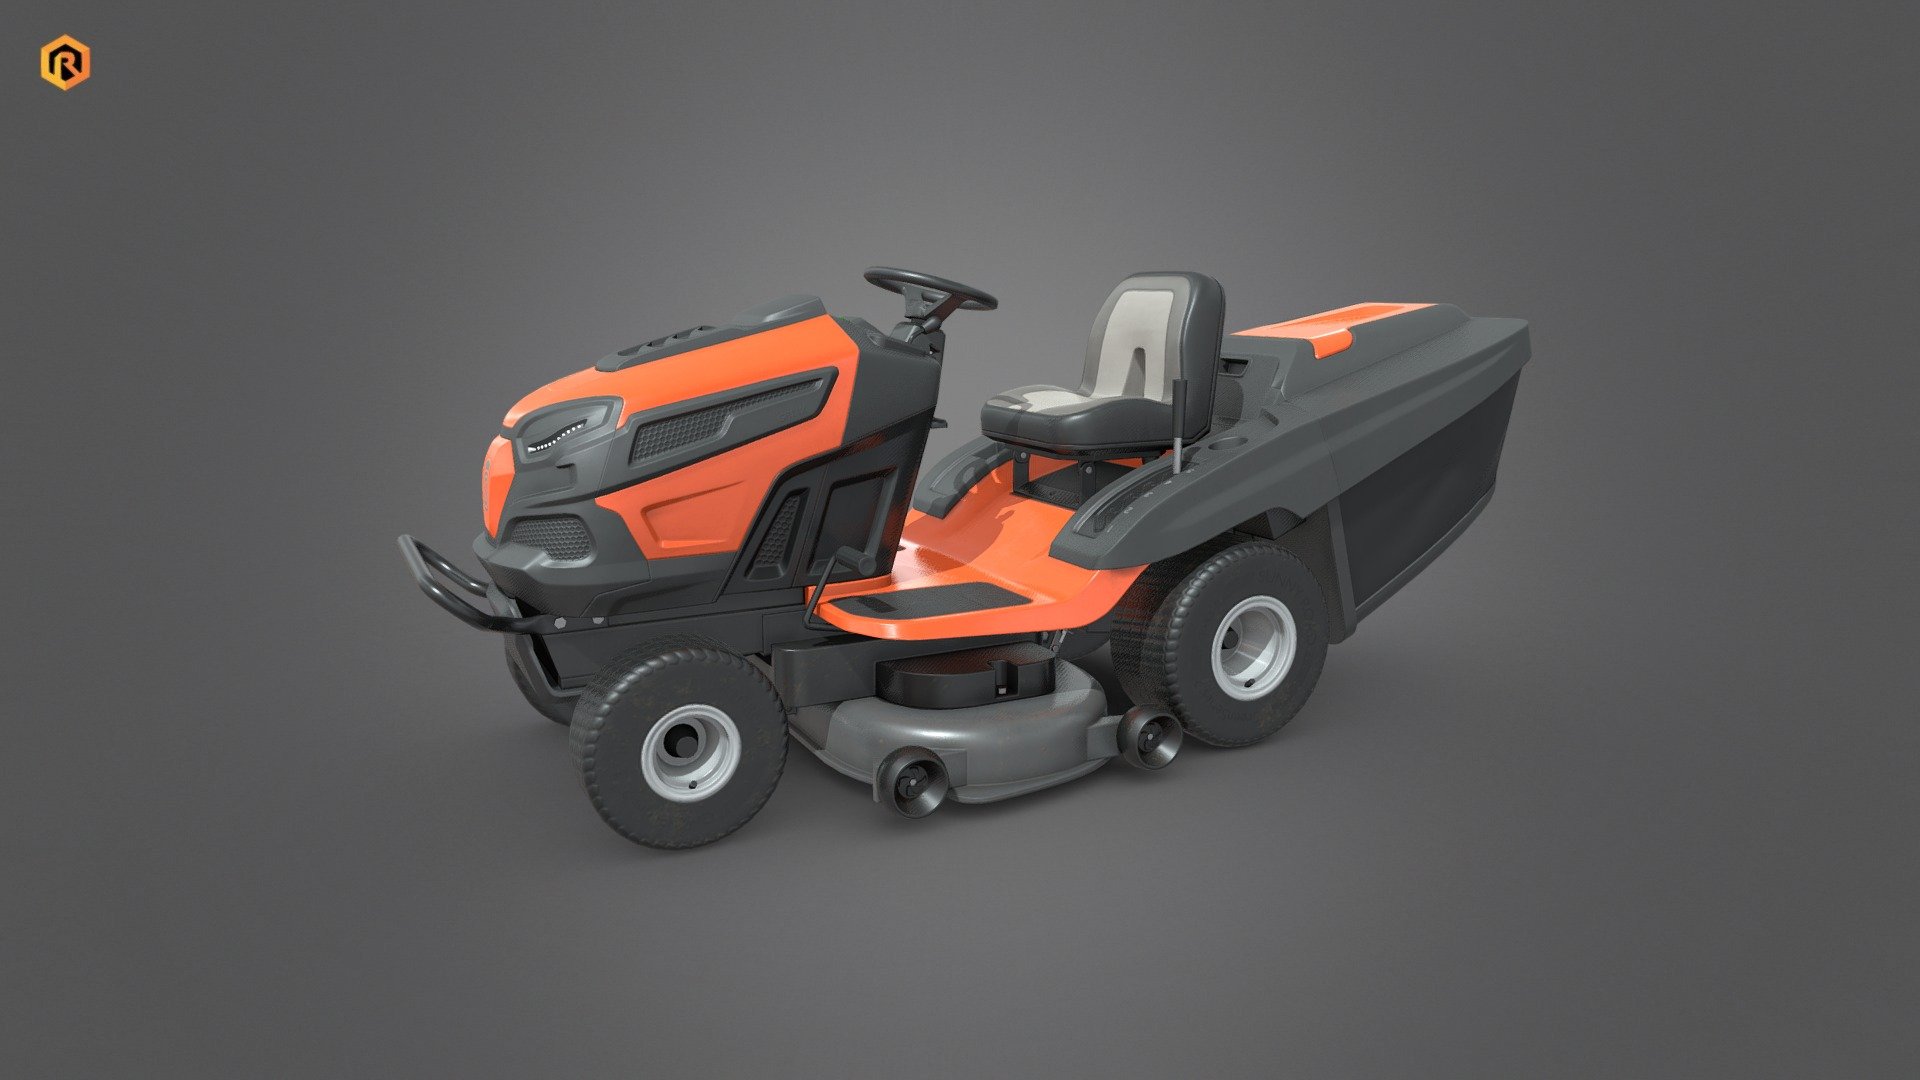 Low-poly PBR 3D model of Lawn Tractor.
This 3D model is best for use in games and other VR / AR, real-time applications such as Unity or Unreal Engine.  It can also be rendered in Blender (ex Cycles) or Vray as the model is equipped with all required PBR textures.  

Technical details:




3 PBR textures sets (Main Body, Alpha and Emission) 

27961 Triangles

The model is divided into few objects (Main Body, Basket, Wheels, Steering Wheel etc)

Lot of additional file formats included (Blender, Unity, UE4 Maya etc.)  

More file formats are available in additional zip file on product page.

Please feel free to contact me if you have any questions or need any support for this asset.

Support e-mail: support@rescue3d.com - Lawn Tractor - Buy Royalty Free 3D model by Rescue3D Assets (@rescue3d) 3d model